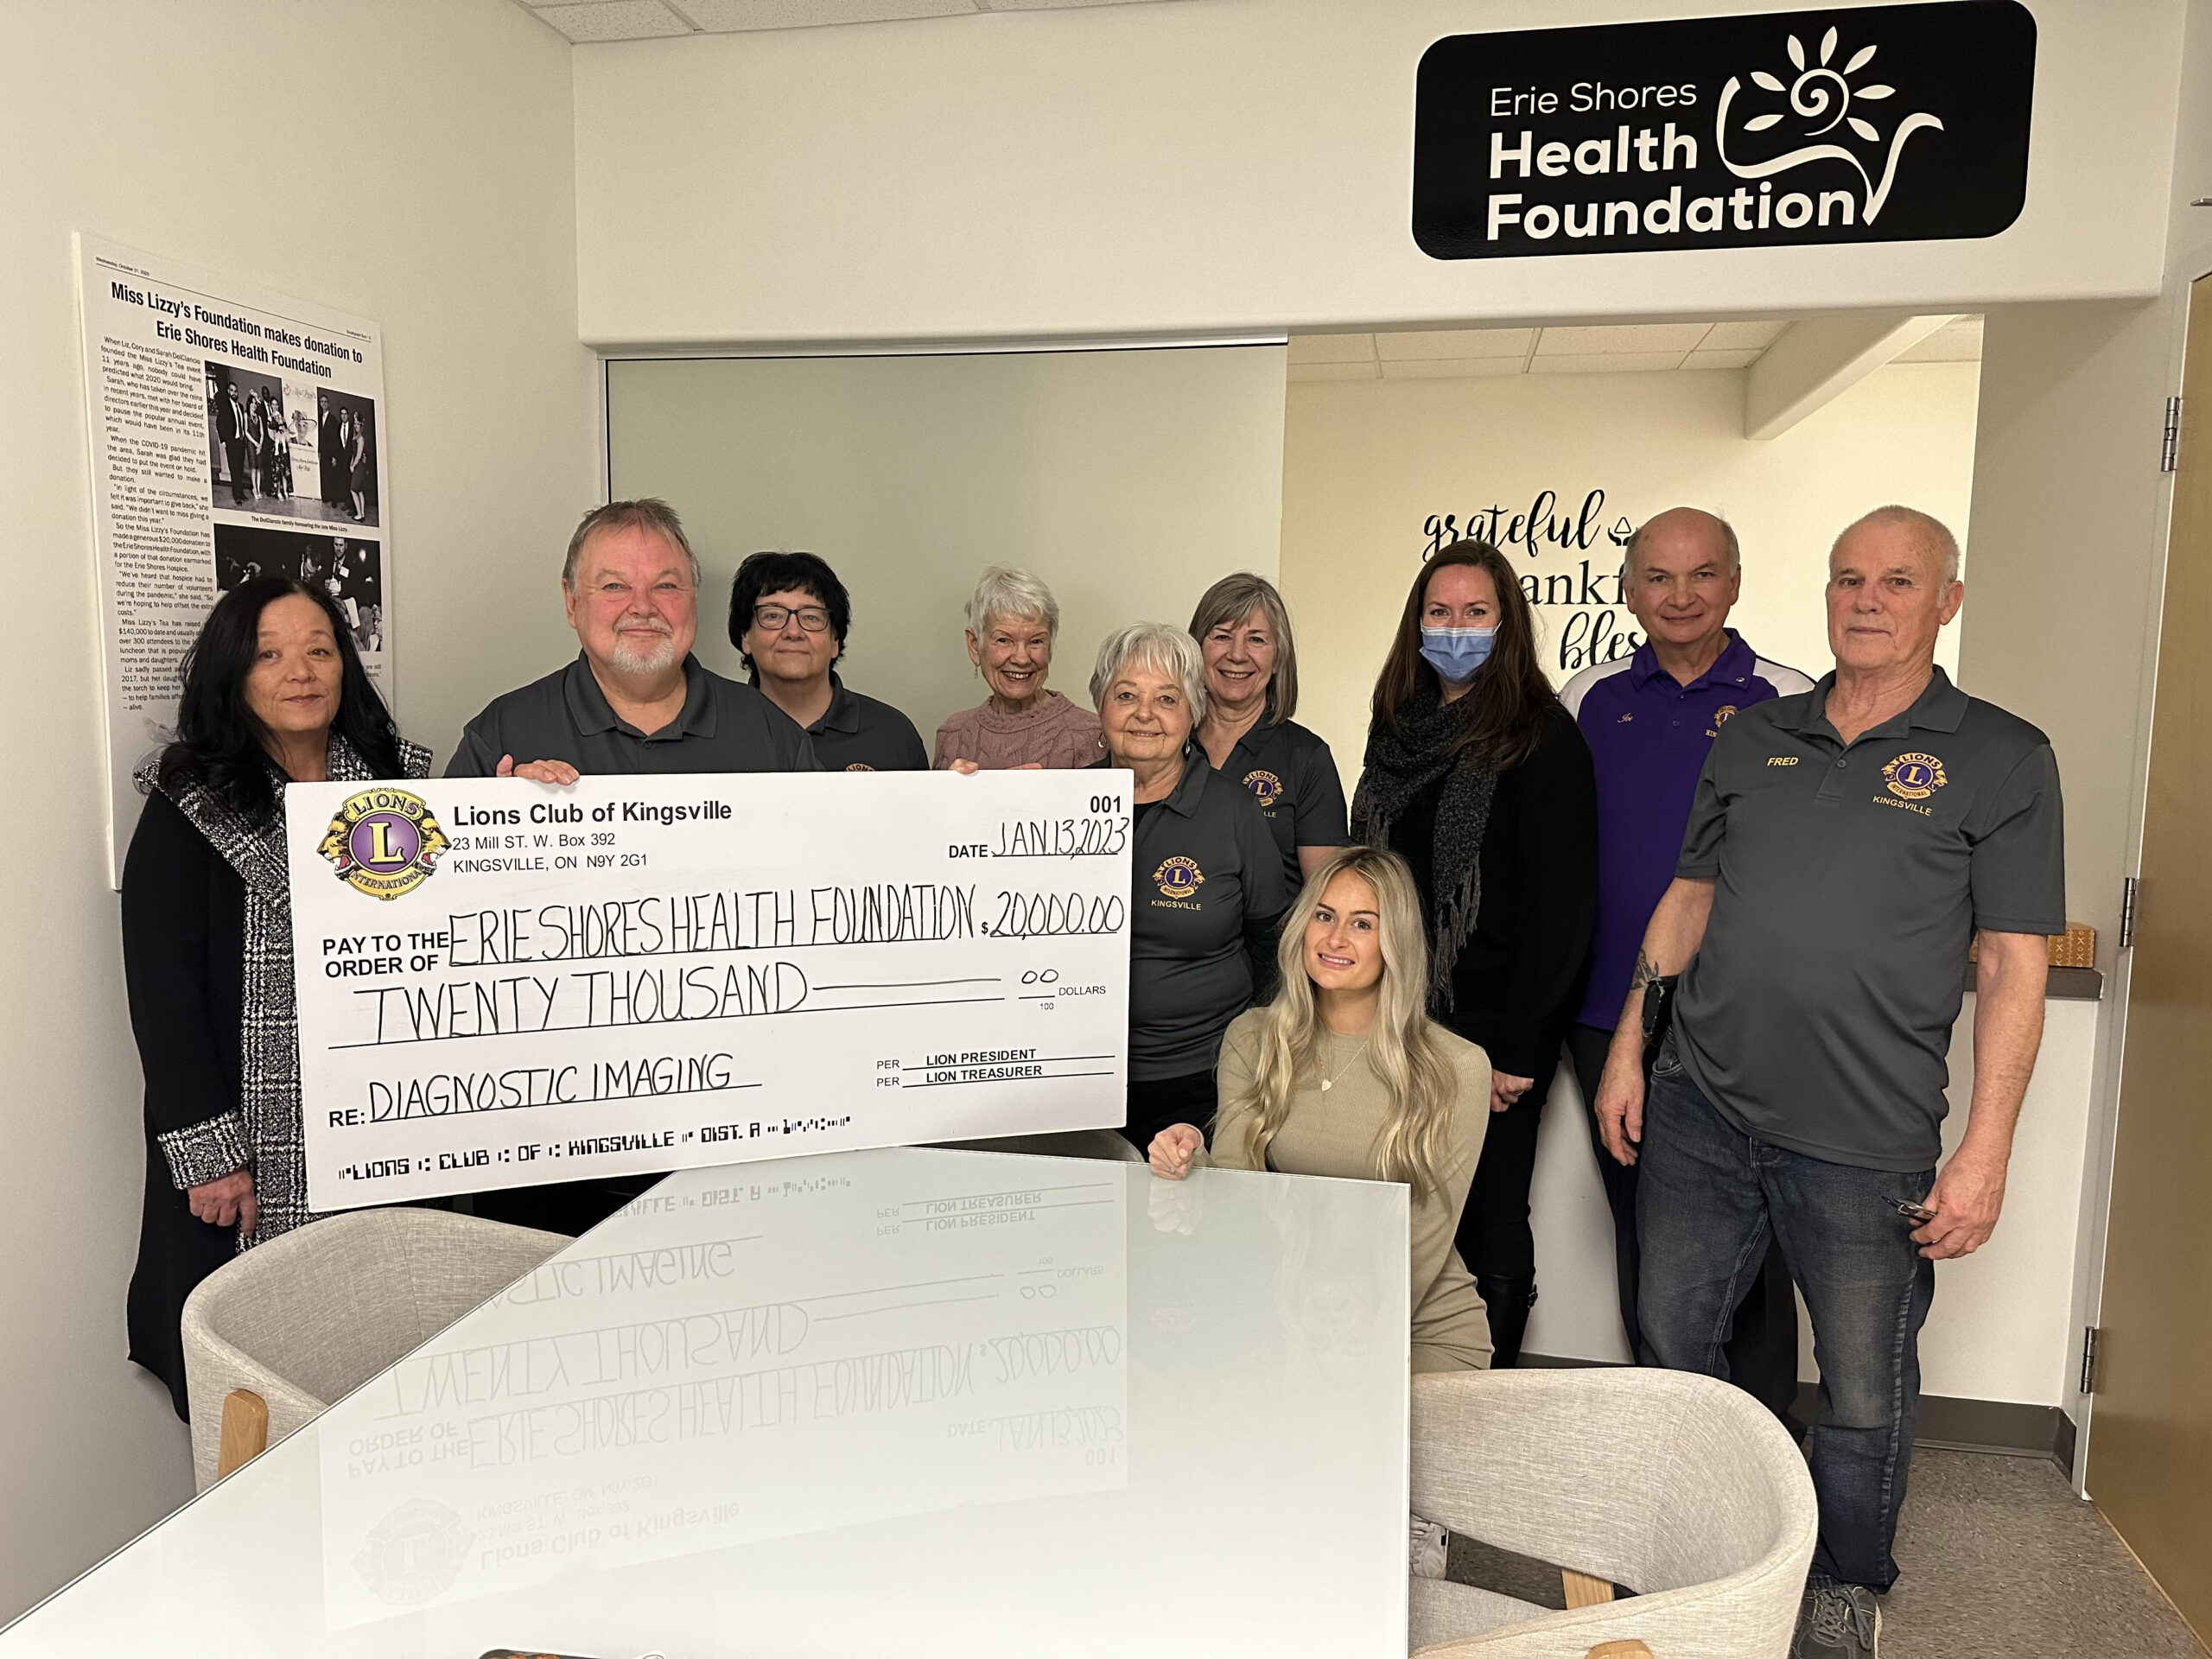 The Lions Club of Kingsville Kick-Starts Erie Shores HealthCare’s New Year with a $20,000 Cheque for Erie Shores Health Foundation